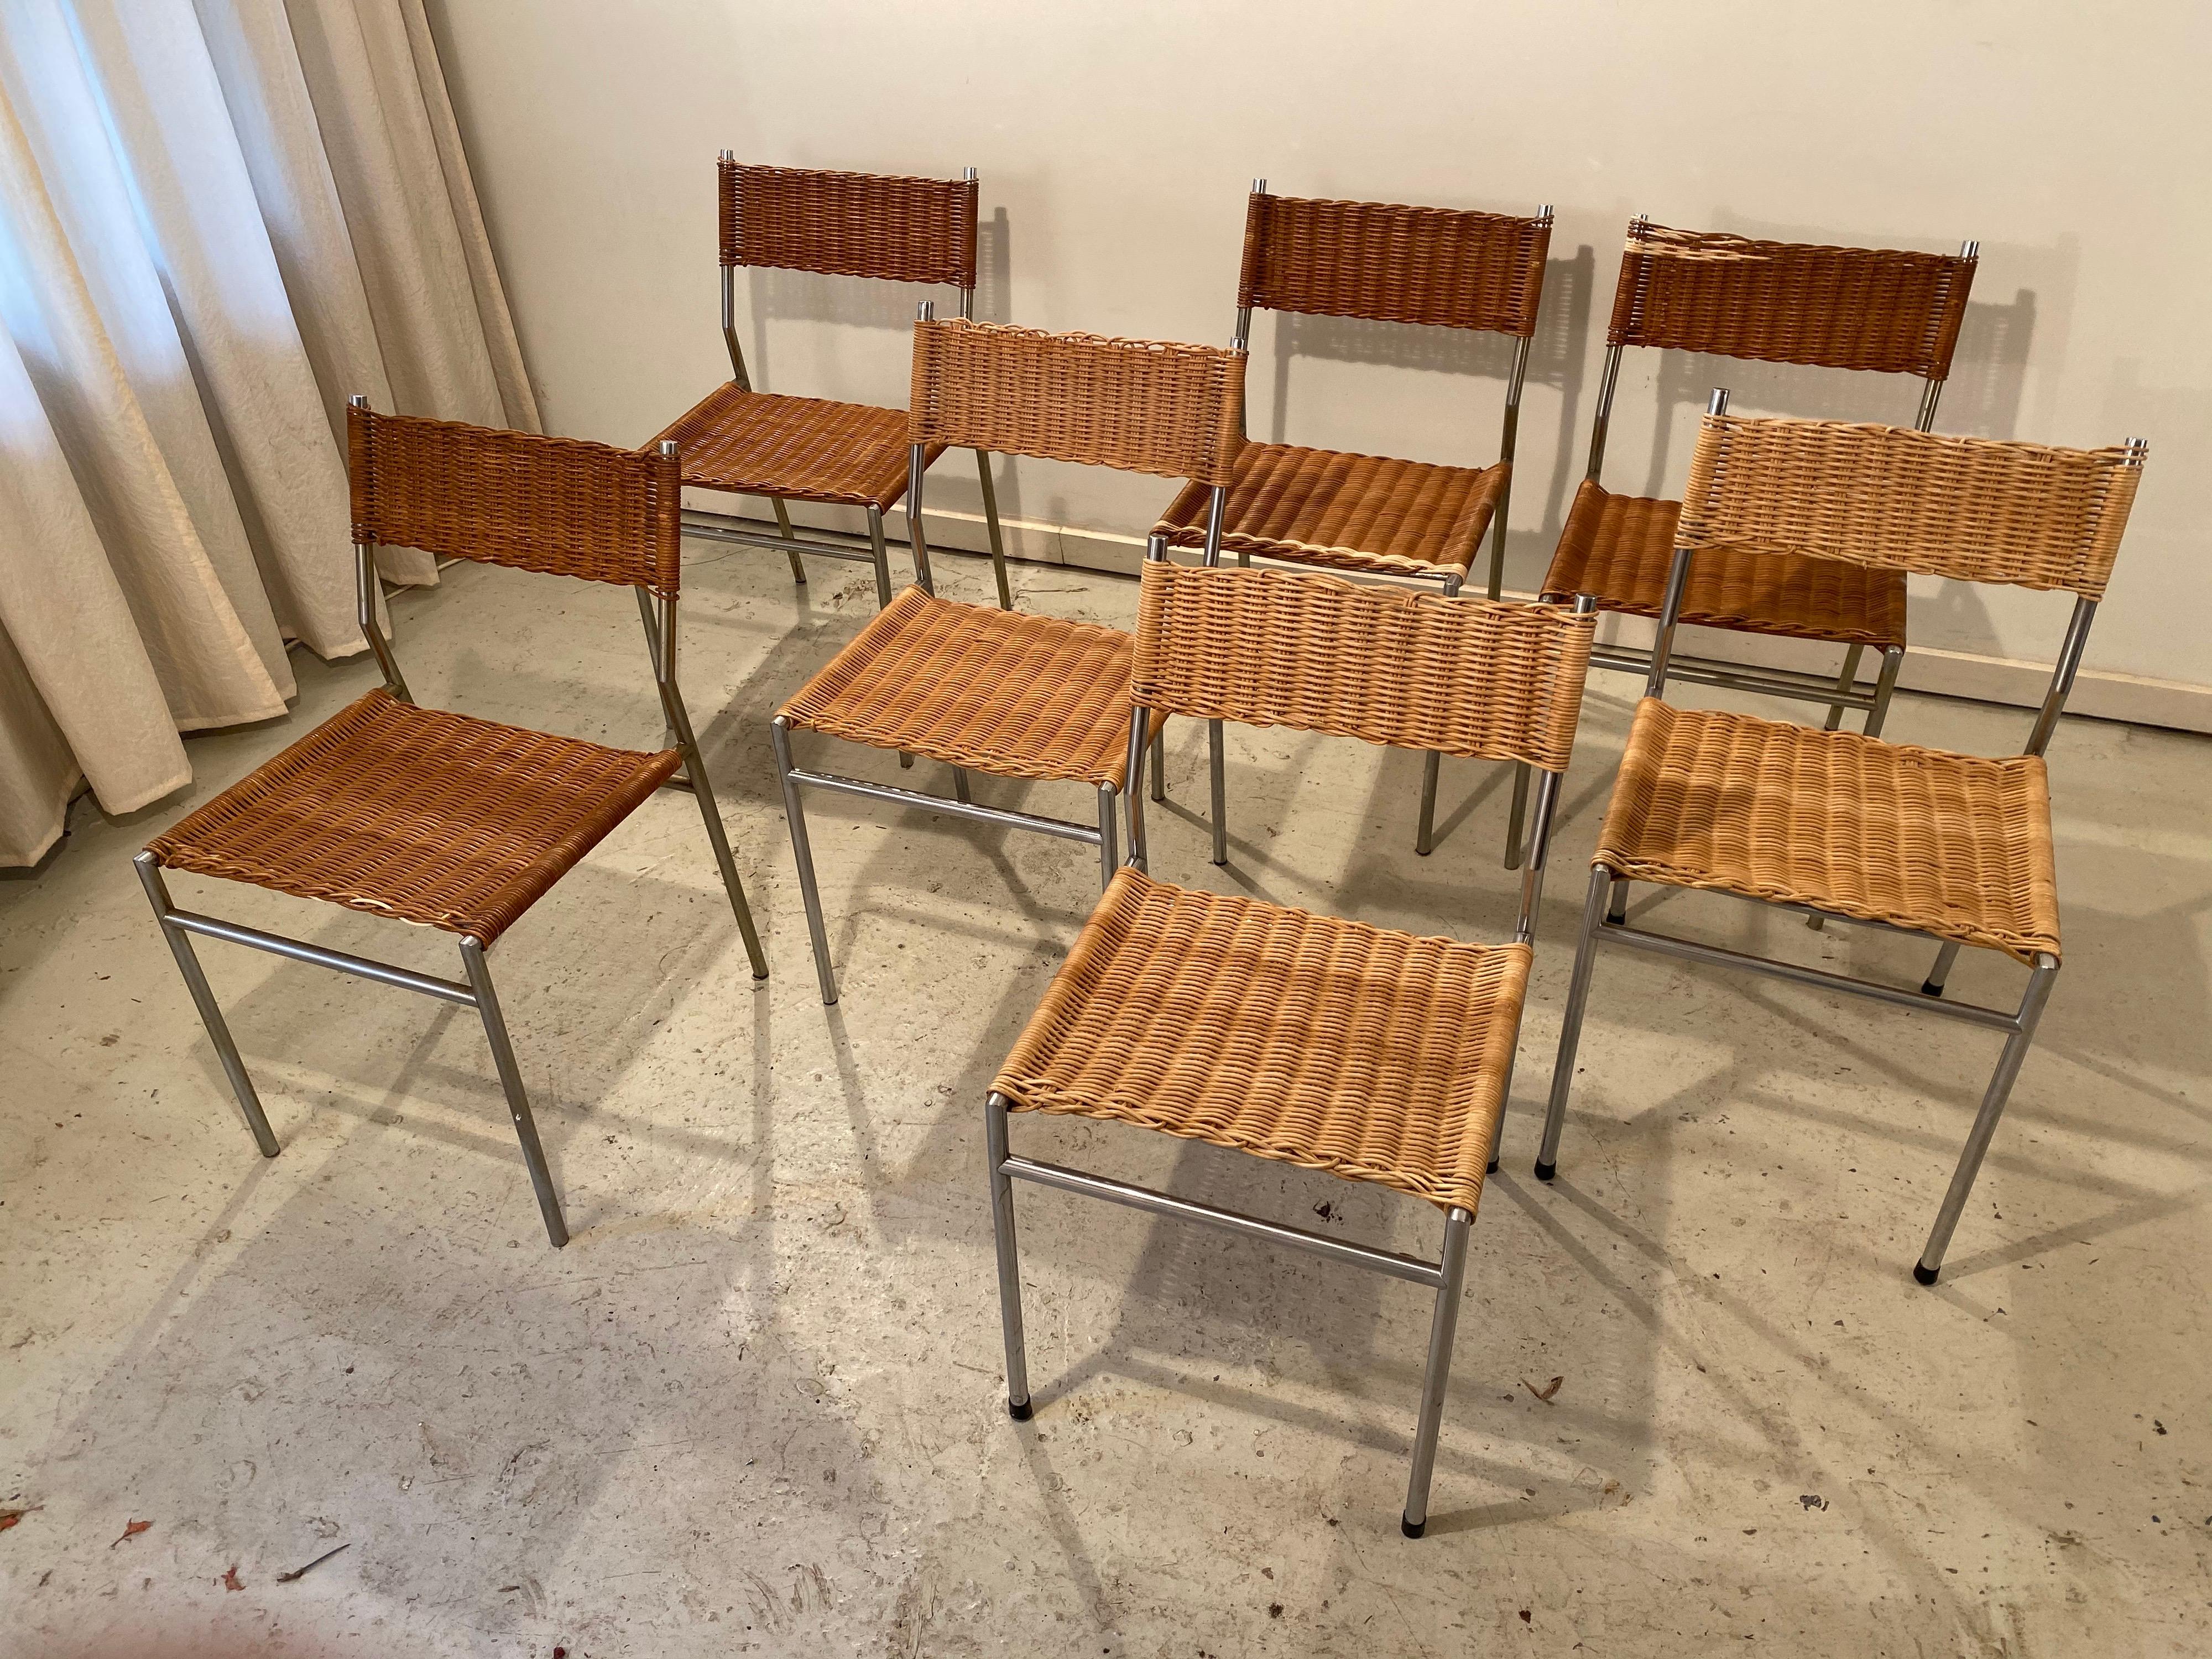 Beautiful wicker dining chairs by famous Dutch designer Martin Visser. Brushed aluminum and wicker seats. Wicker damages have been repaired professionally. The color difference between the new and original wicker disappear over time. Price is per